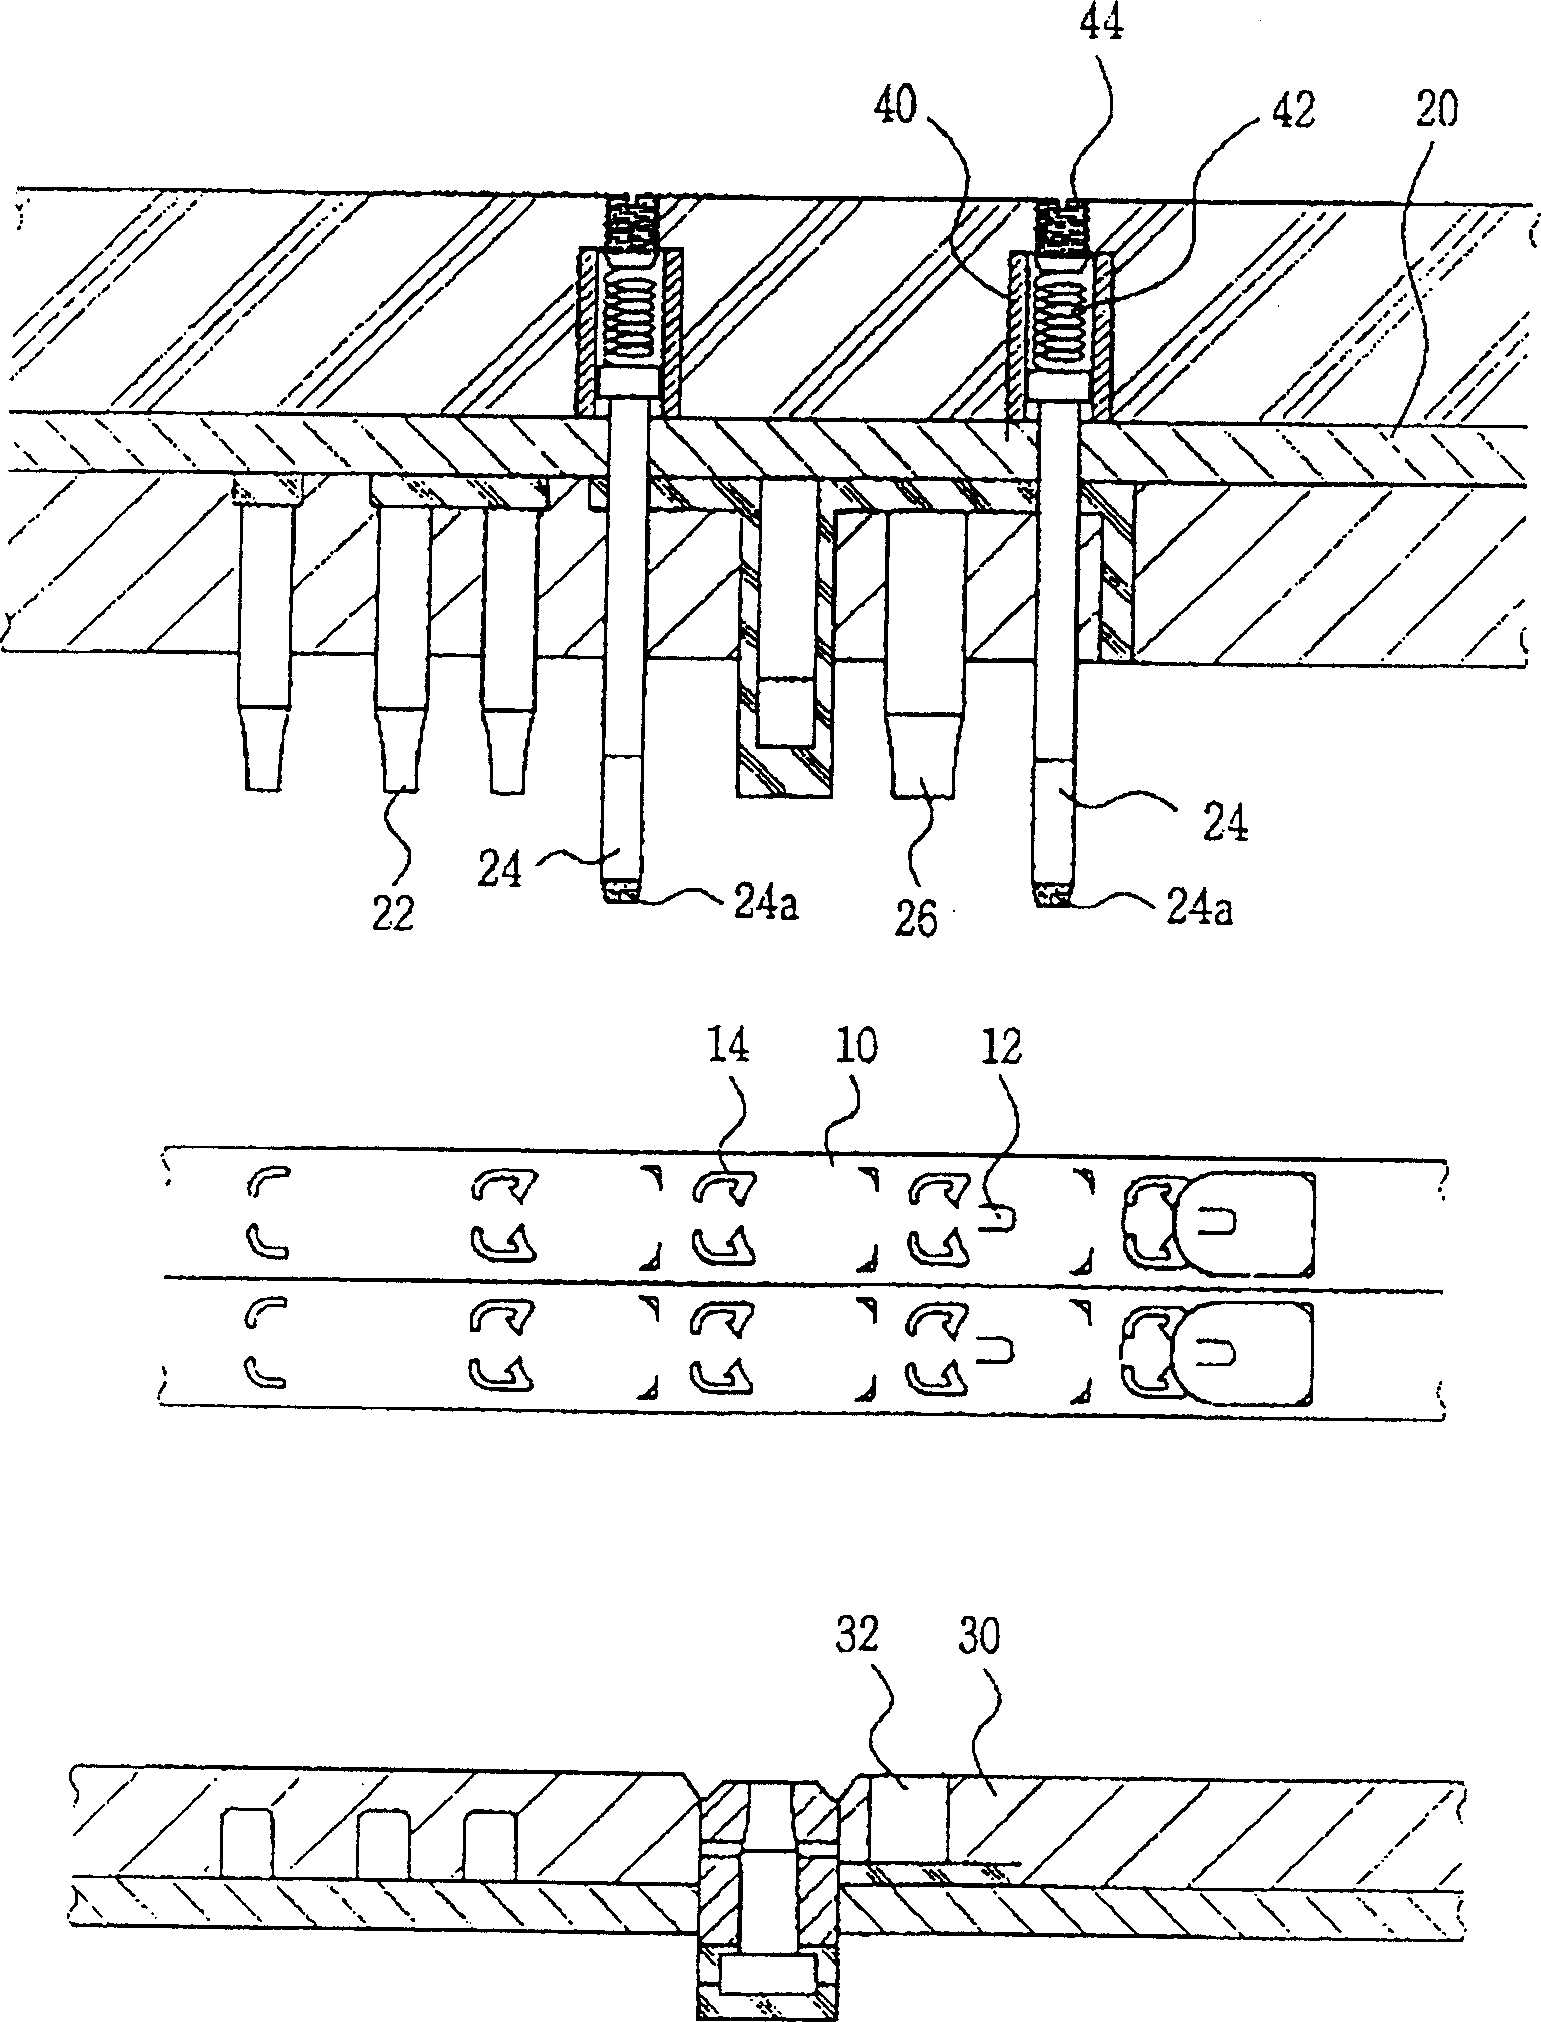 Method of manufacturing an aluminum design tab end for a beverage can